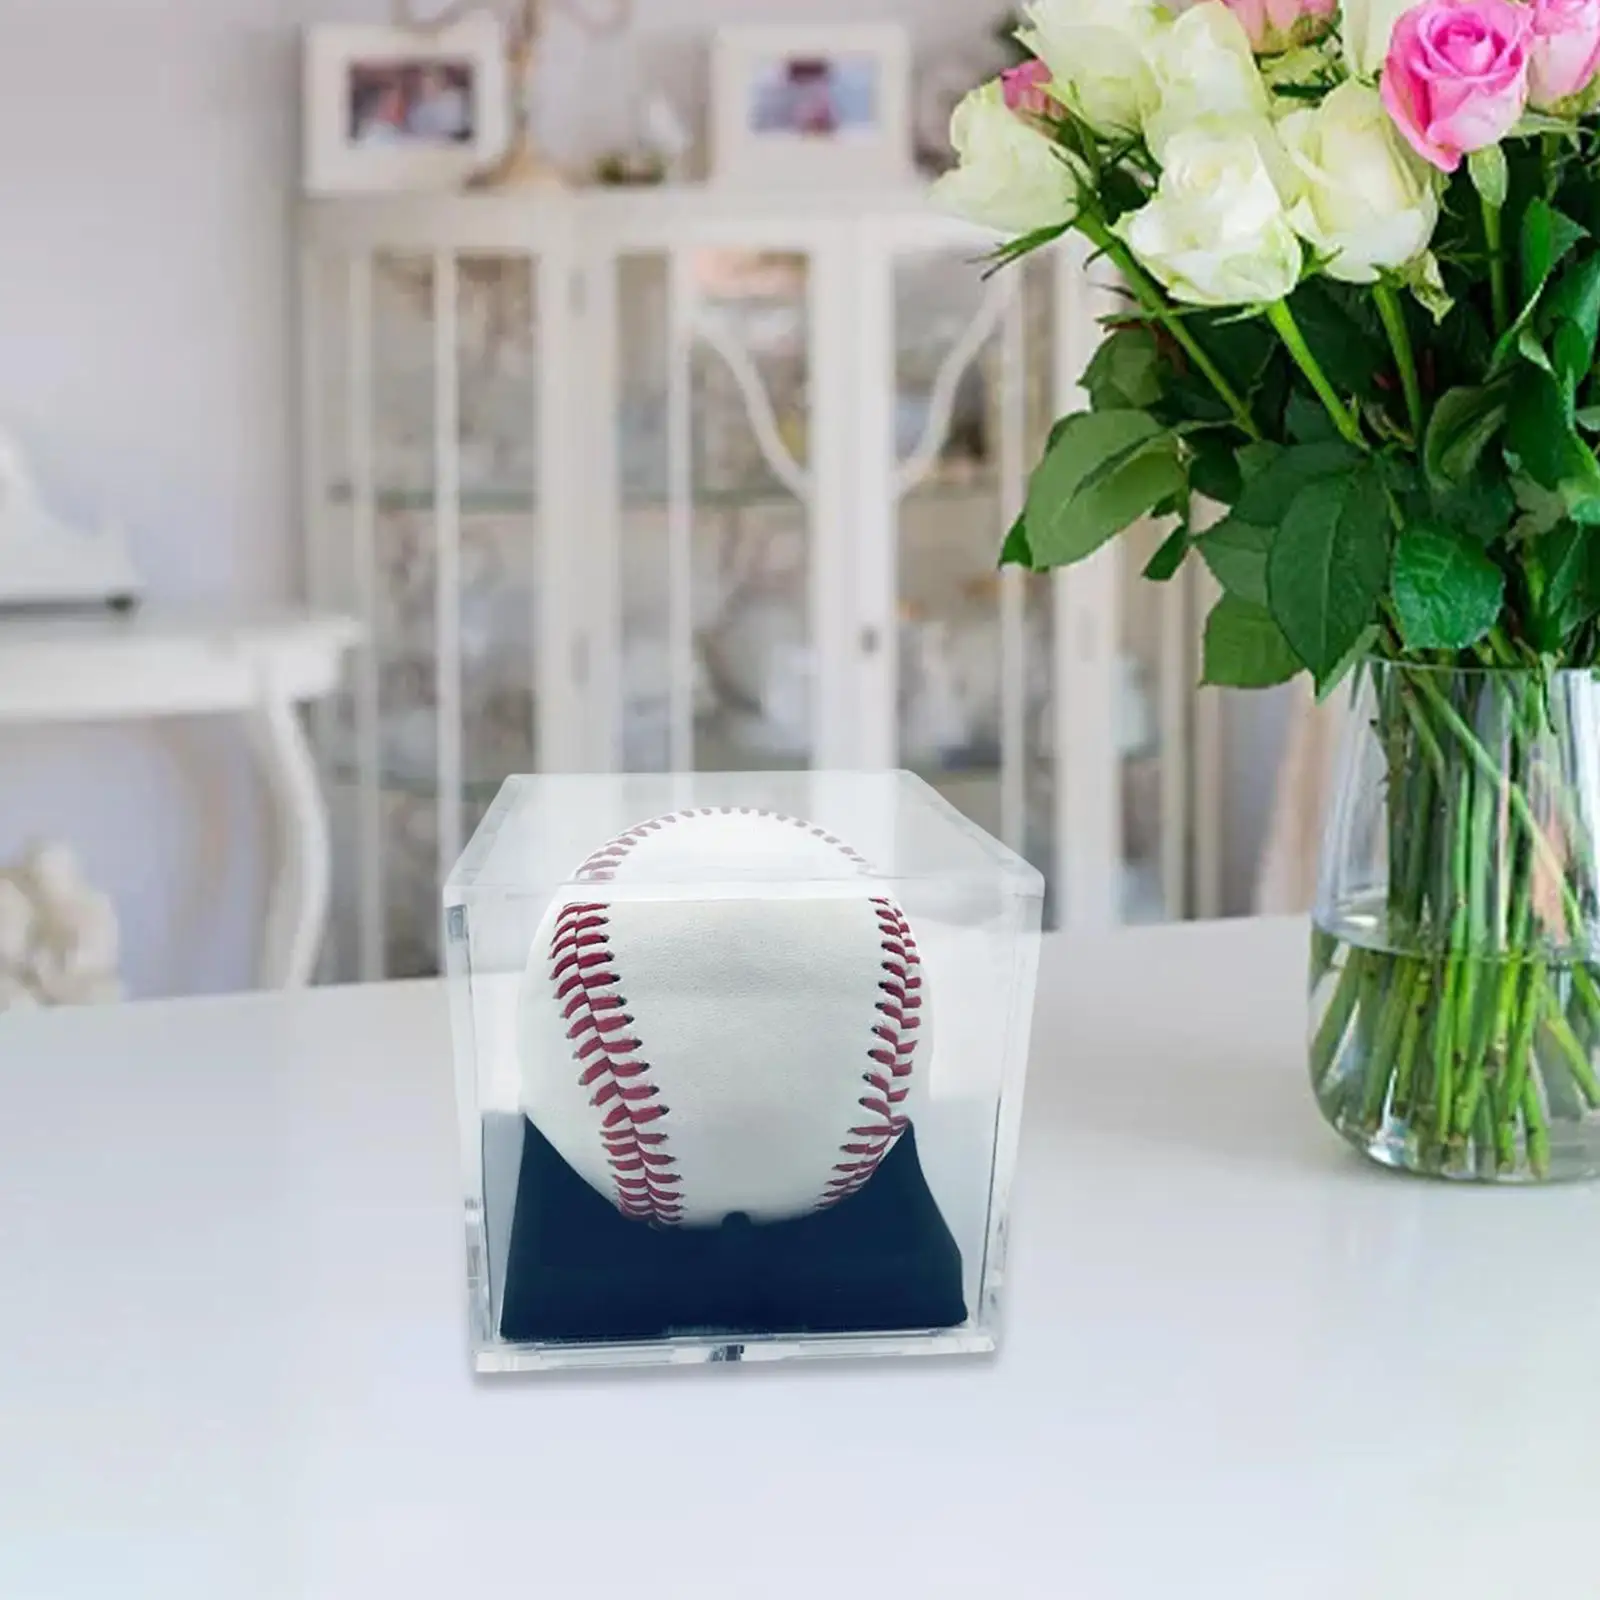 Clear Square Display Case Hobby Visual Acrylic Box for Display Baseball Display Case for Doll Office Trophie Jewelry Hotel